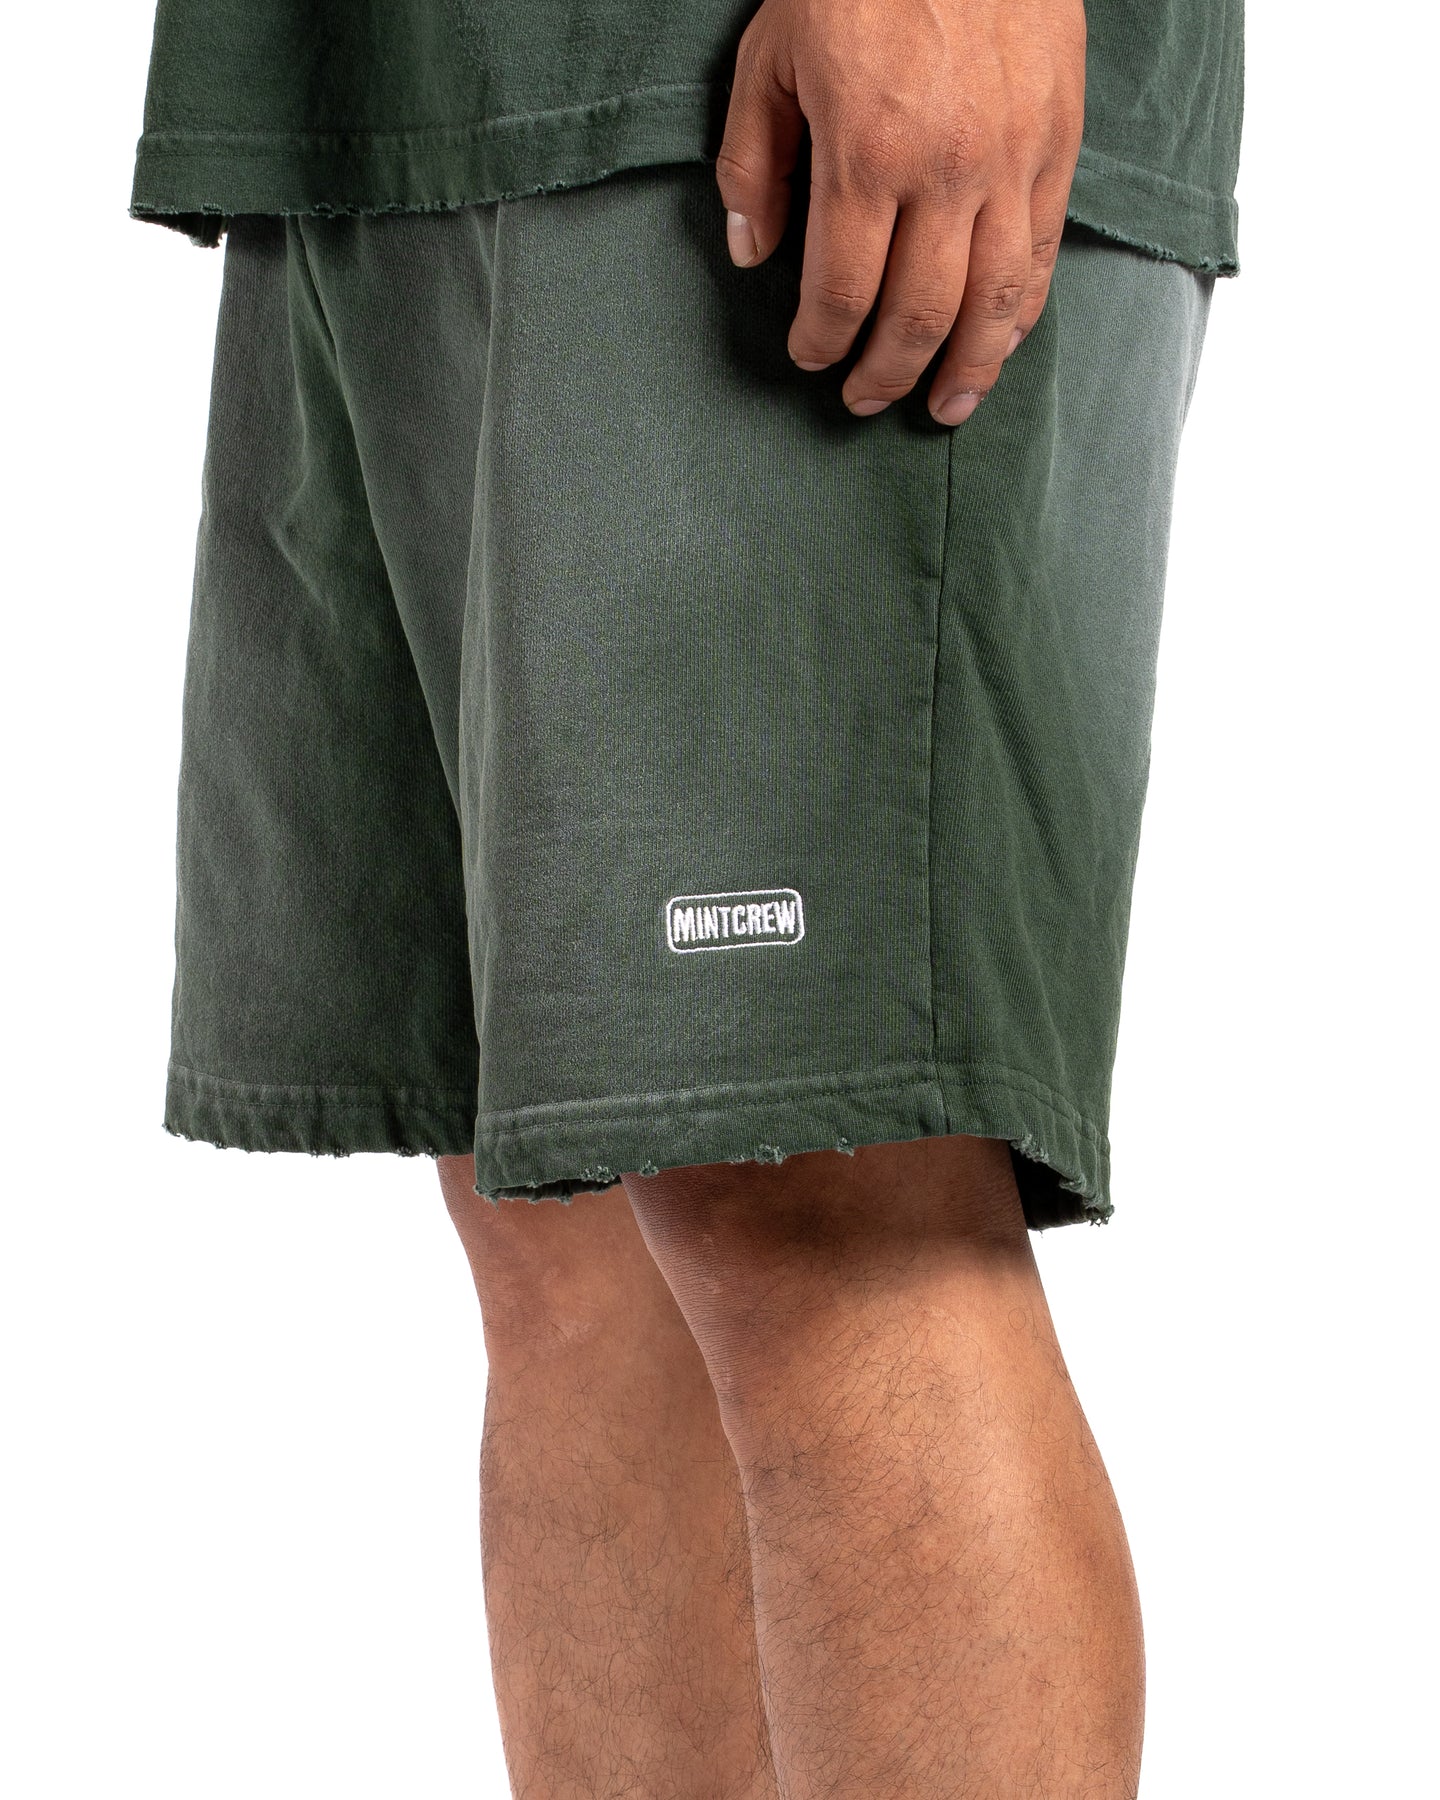 SUN FADED STAMPED LOGO SHORTS (PINE)